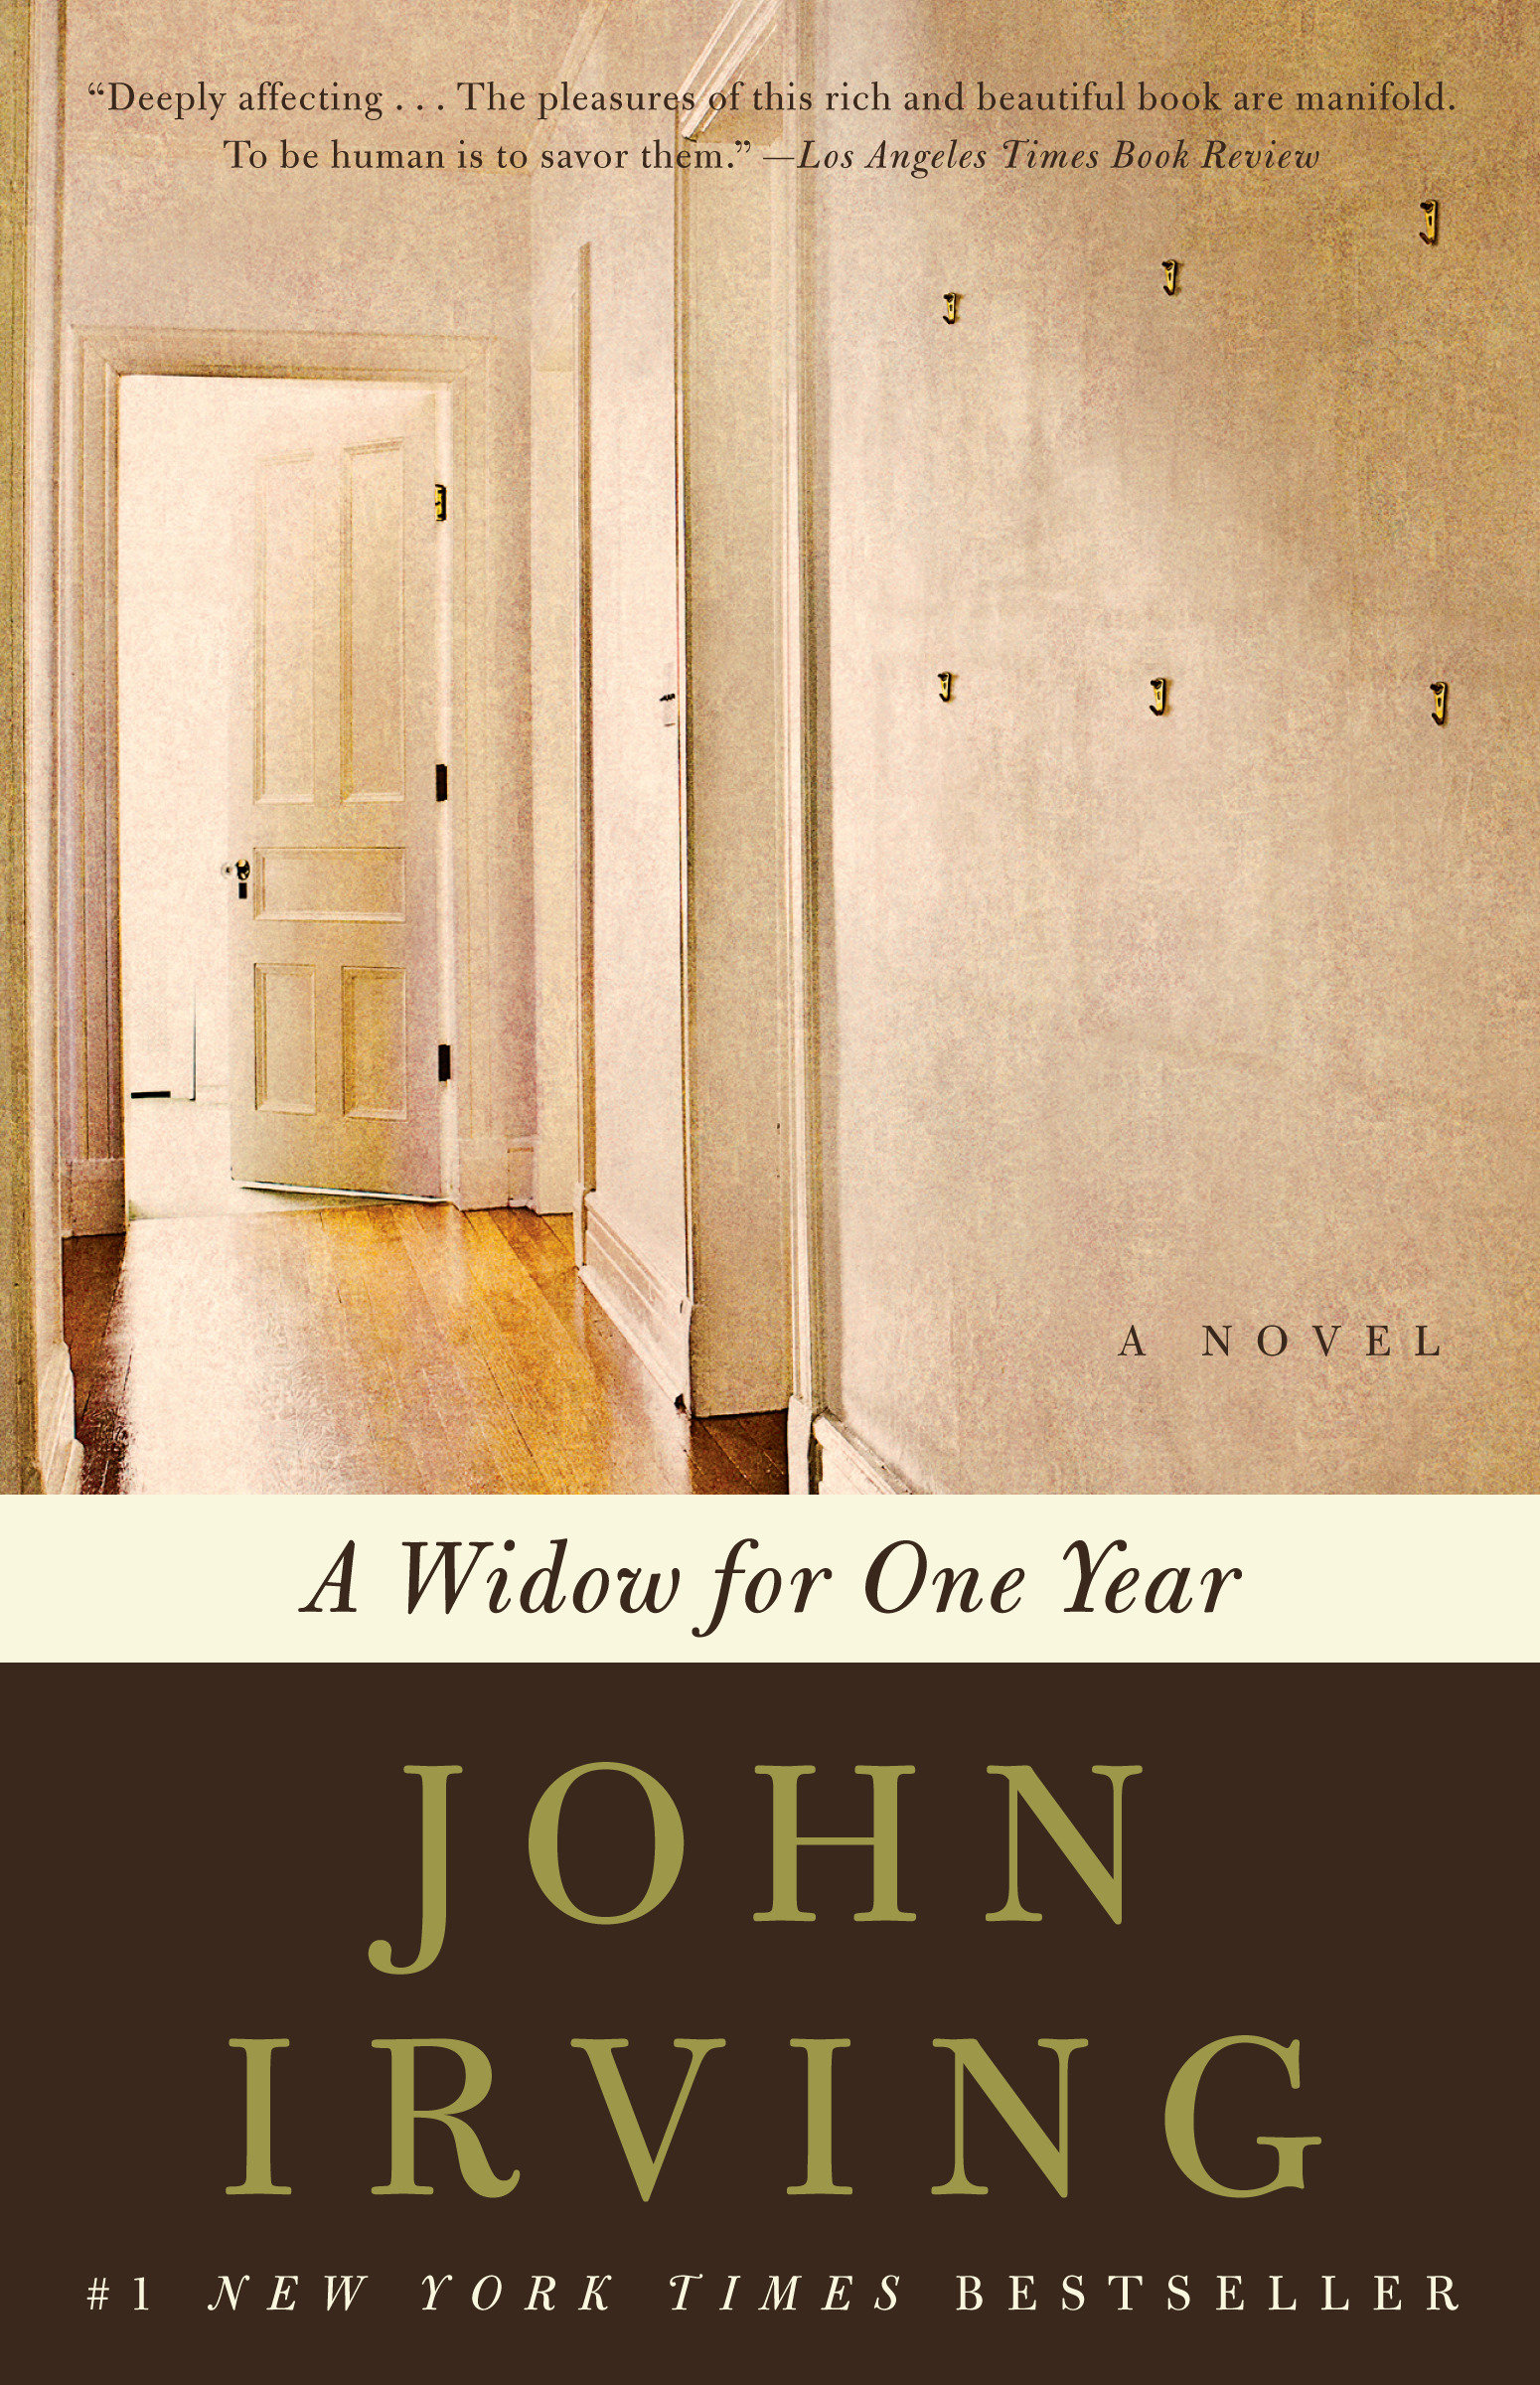 Image de couverture de A Widow for One Year [electronic resource] : A Novel